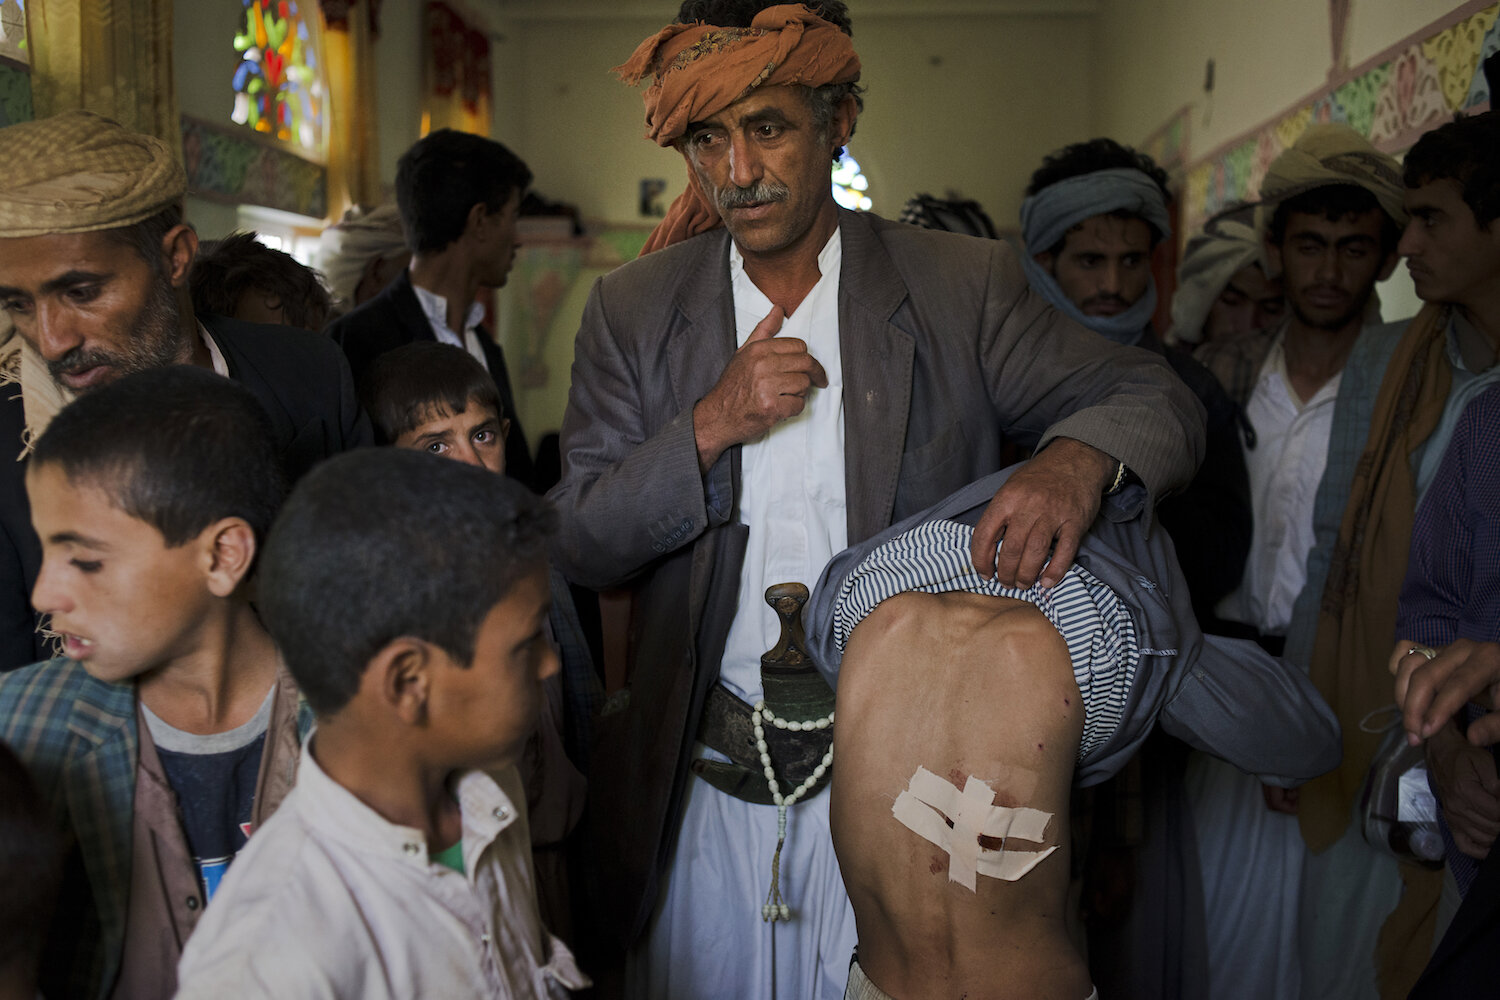  Al Joob Village, Amran Governorate, Yemen on July 7, 2015. Two airstrikes on July 6 hit a public market near homes and a mosque and farmers selling produce on the side of the road; the two combined killed over 30 civilians. 